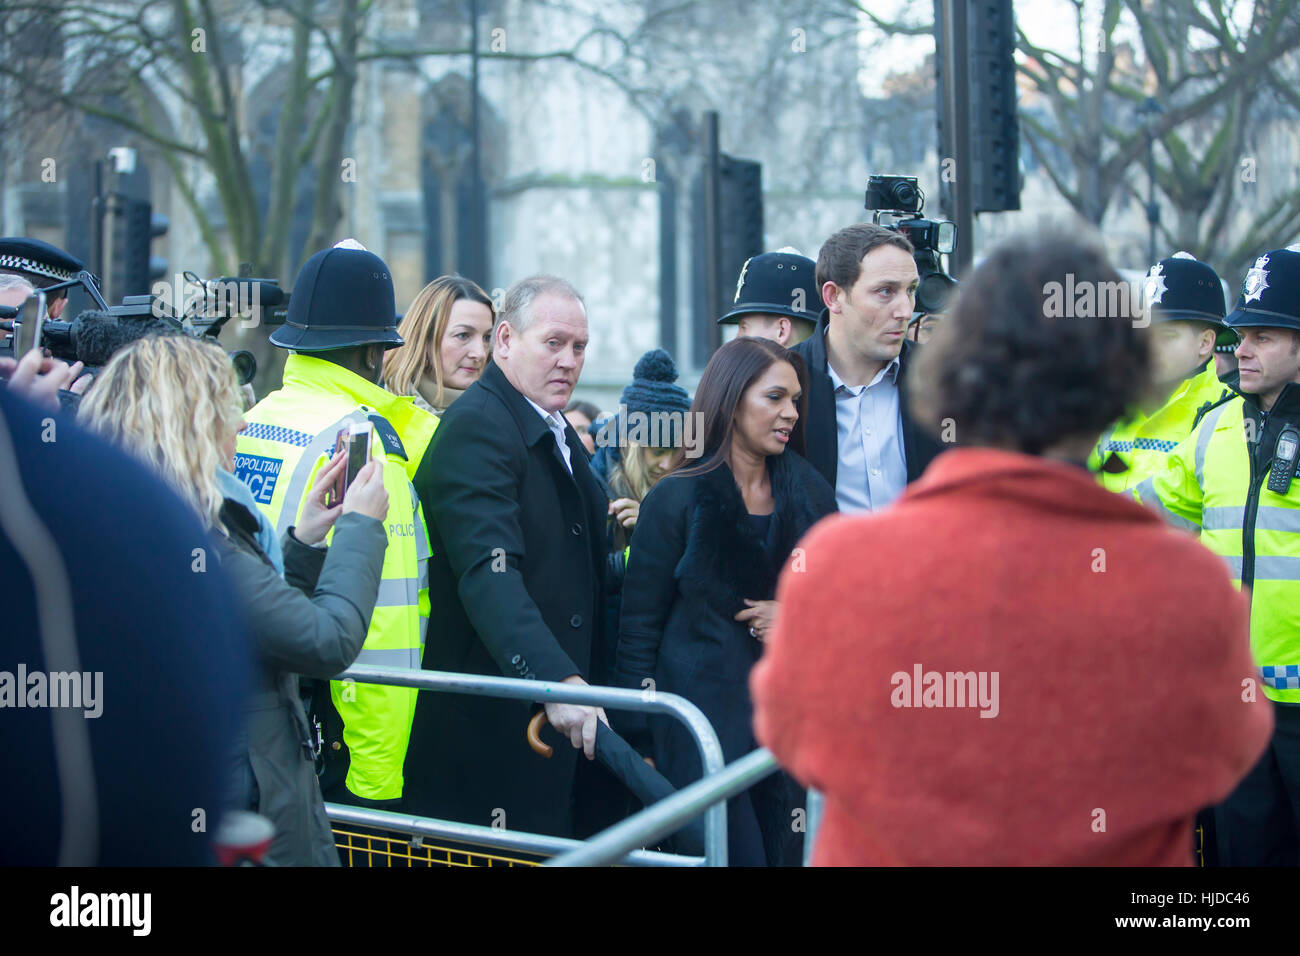 London, UK. 24th Jan, 2017. Verdict of the Supreme Court. Gina Miller arrived at the Supreme Court today with security, to hear the verdict of the Suprememe Court. Credit: Jane Campbell/Alamy Live News Stock Photo